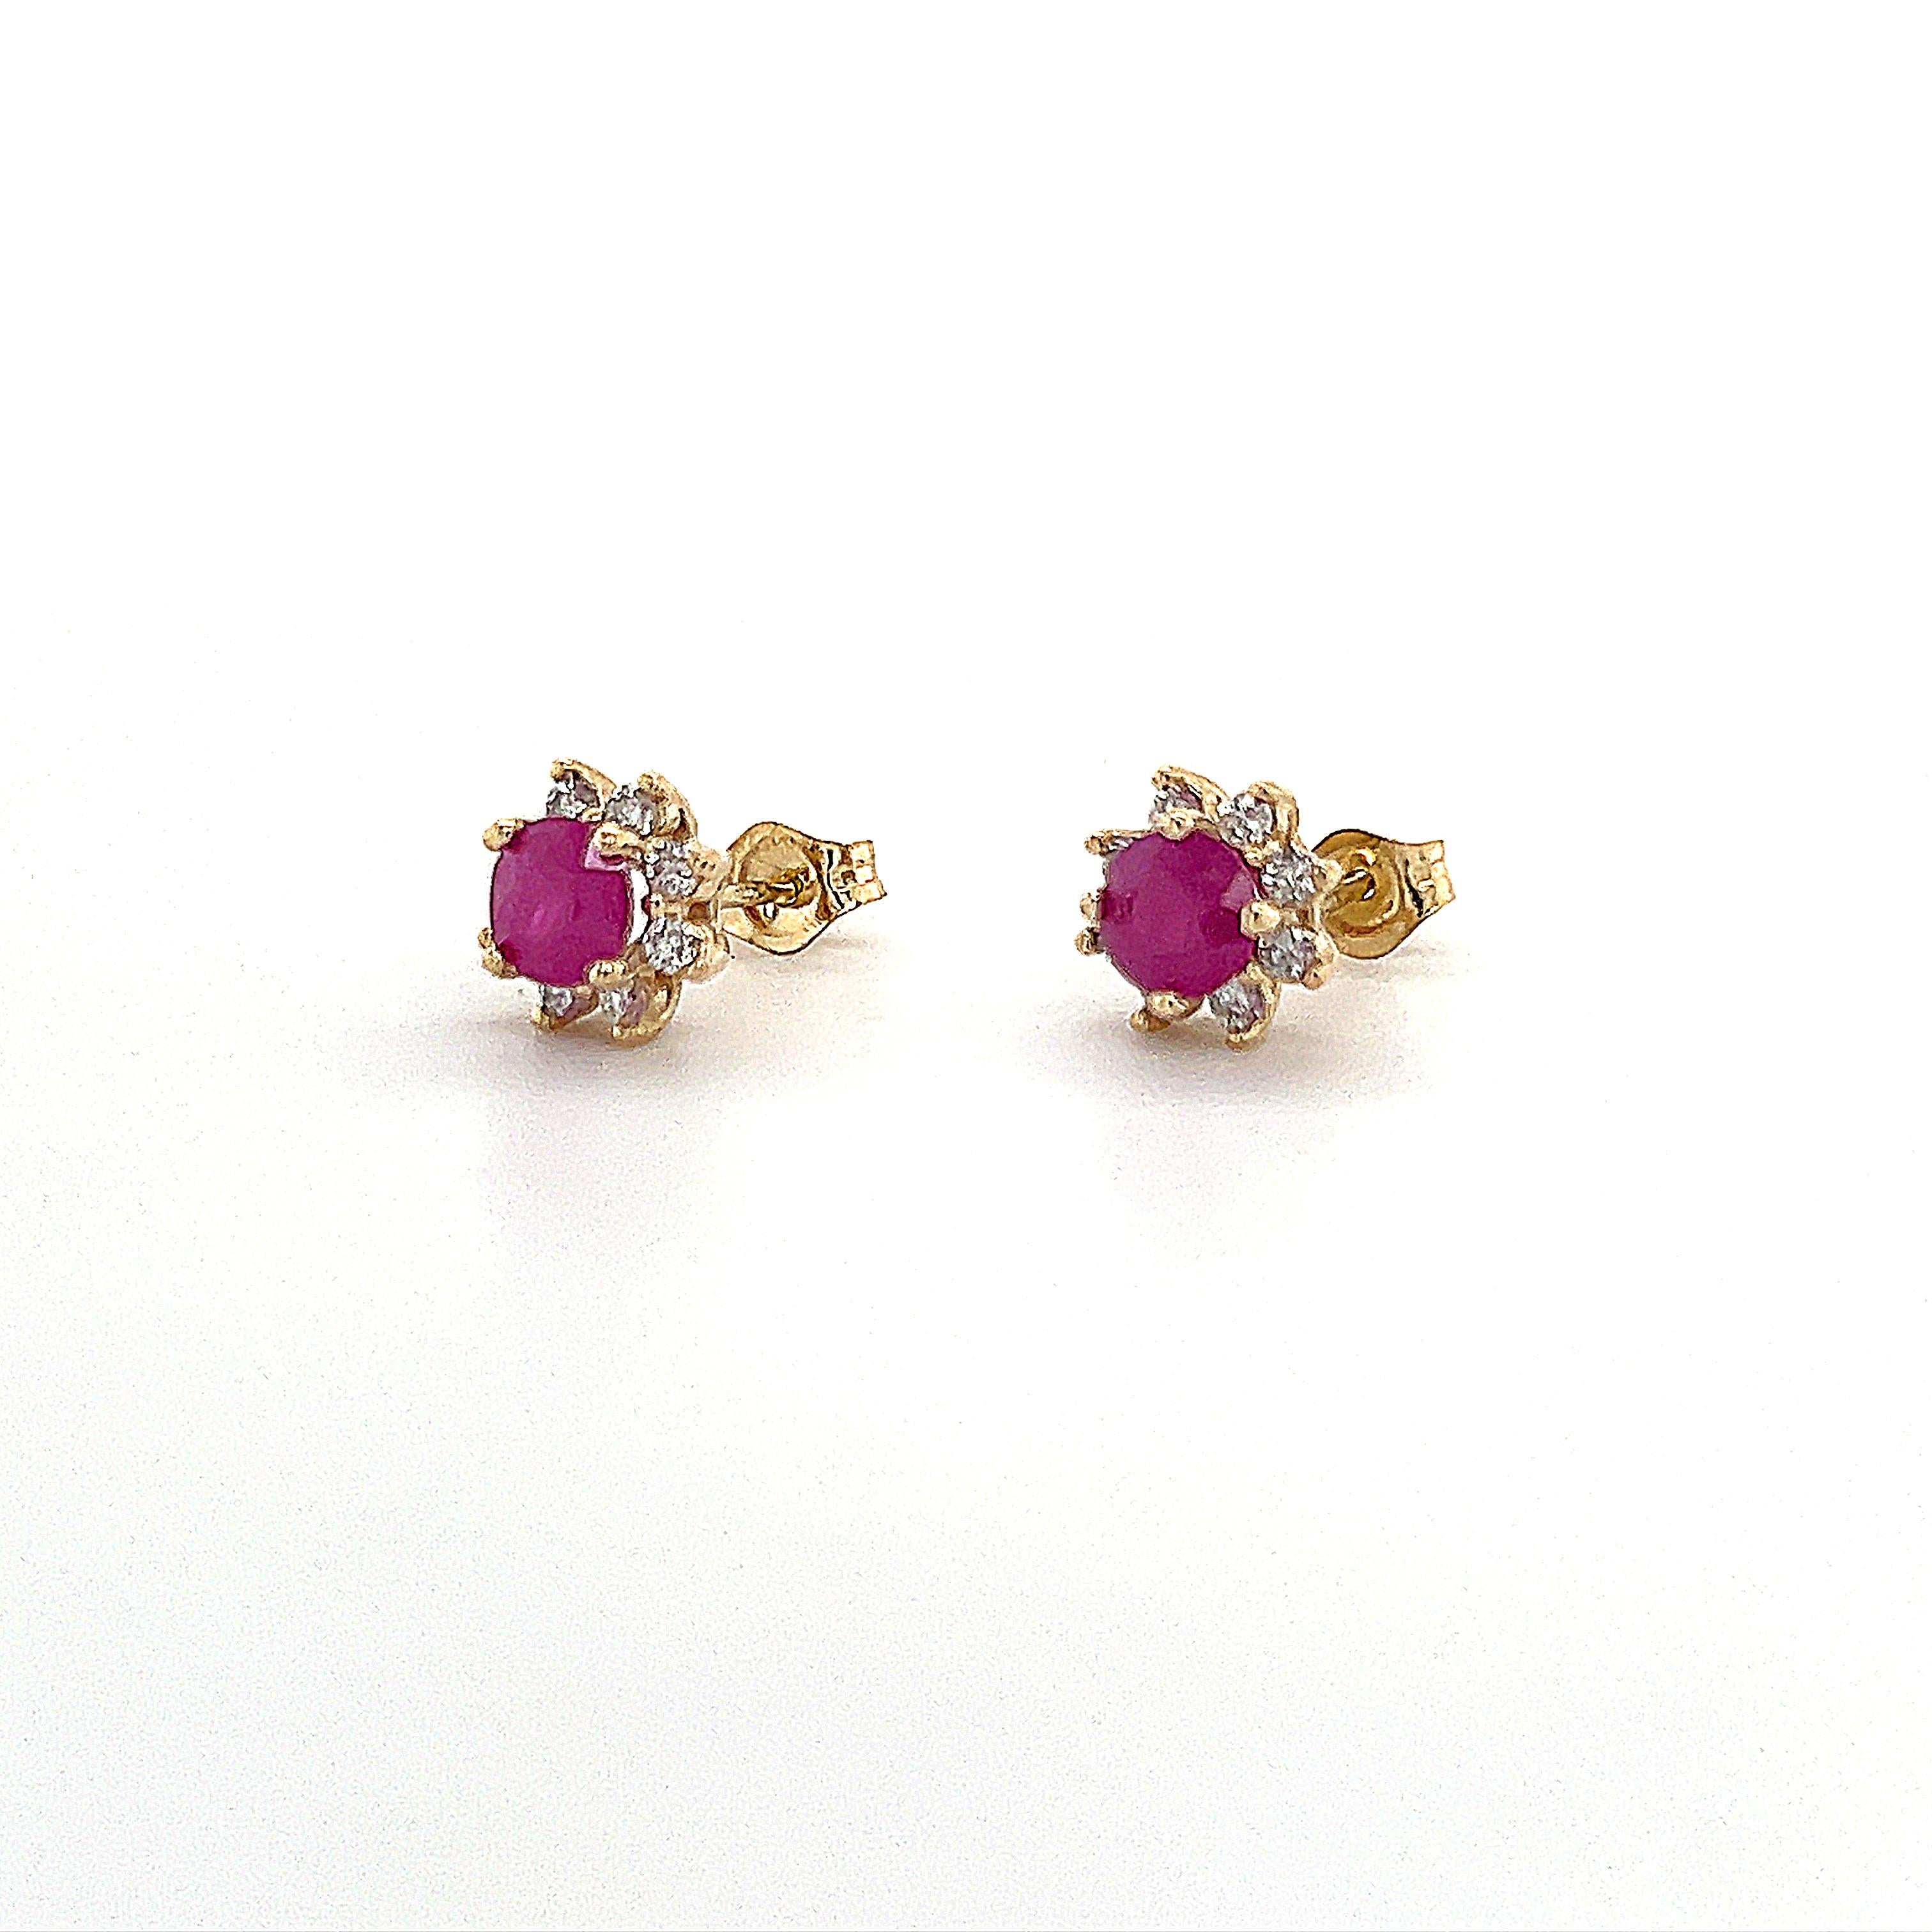 Round Cut Natural Ruby Diamond Earrings 14k Gold 1.25 TCW Certified For Sale